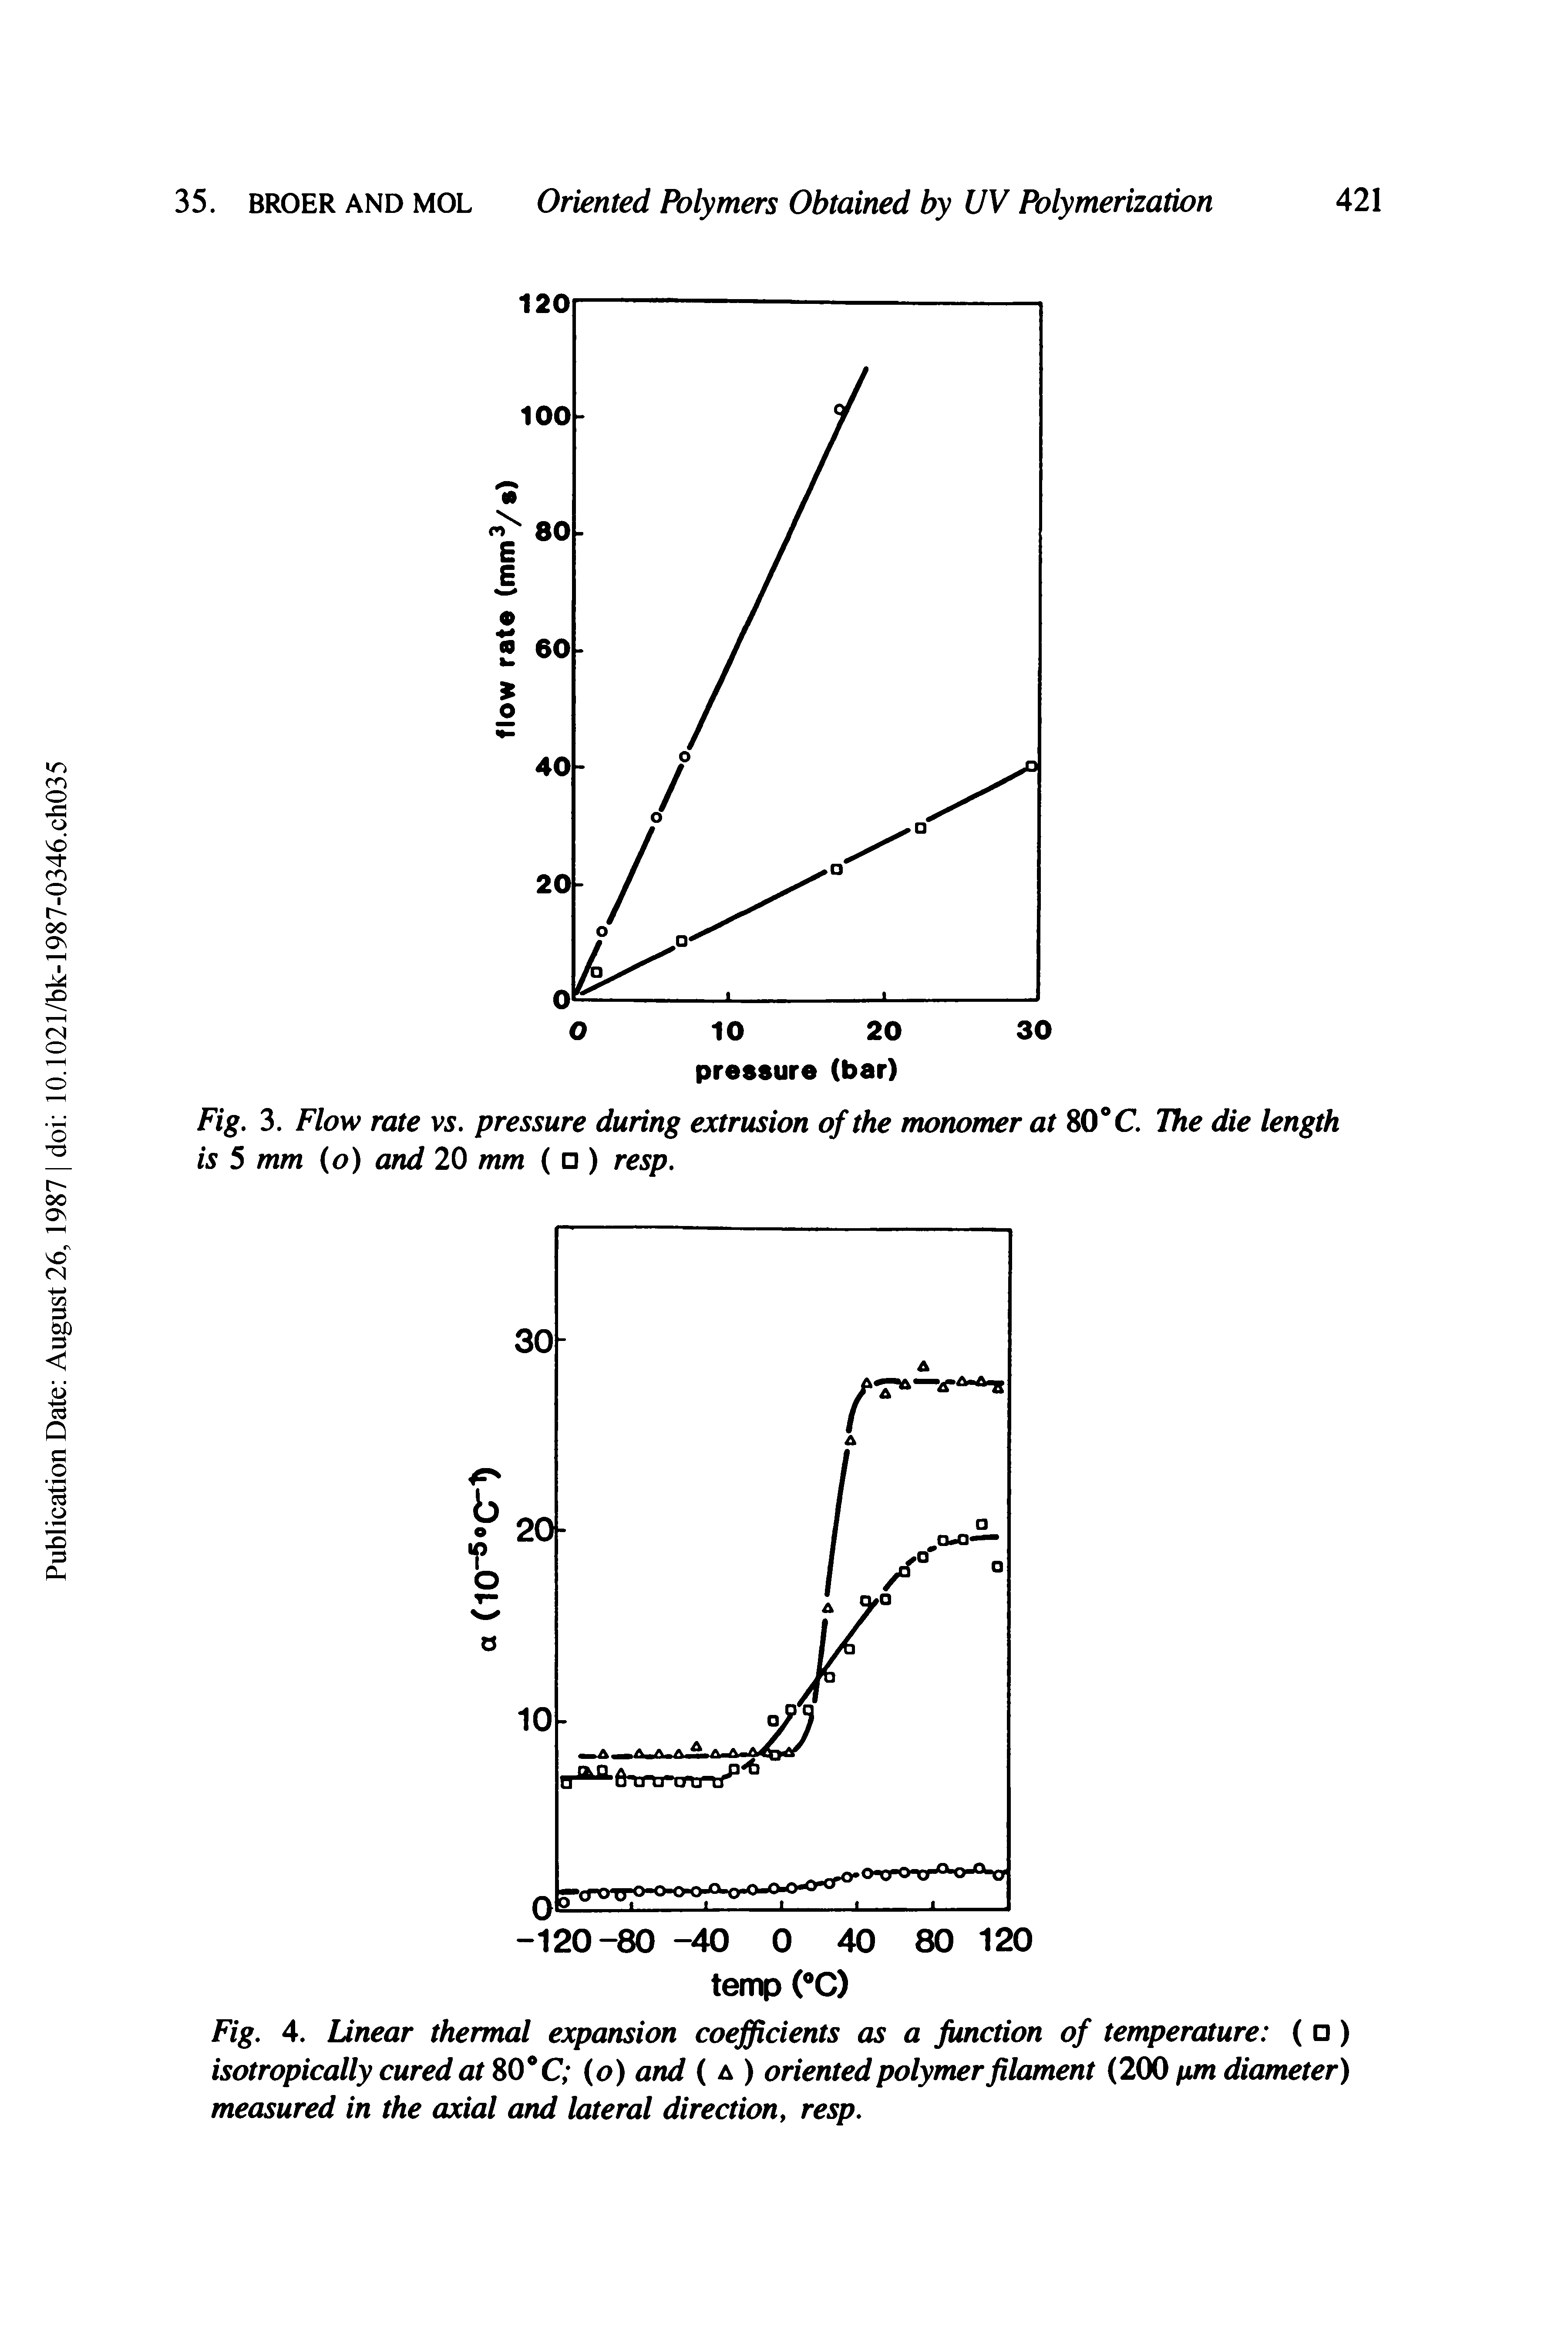 Fig. 4. Linear thermal expansion coefficients as a junction of temperature ( ) isotropically cured at C (o) and ( a ) oriented polymer filament (200 pm diameter) measured in the axial and lateral direction, resp.